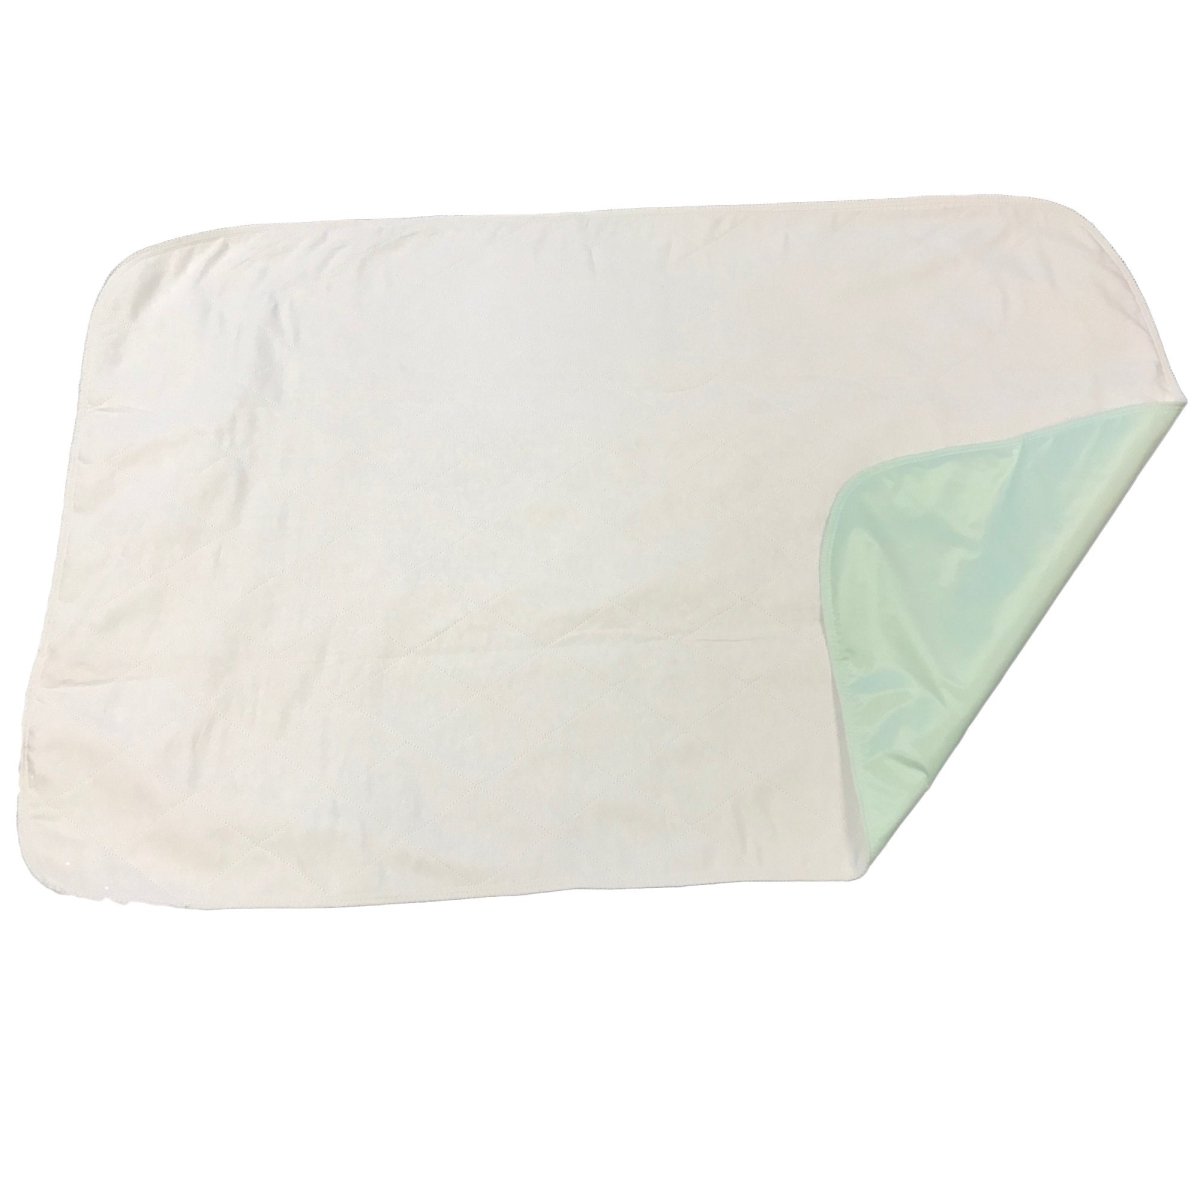 Beck's Classic Underpad, 36 x 54 Inch - 1125494_EA - 1